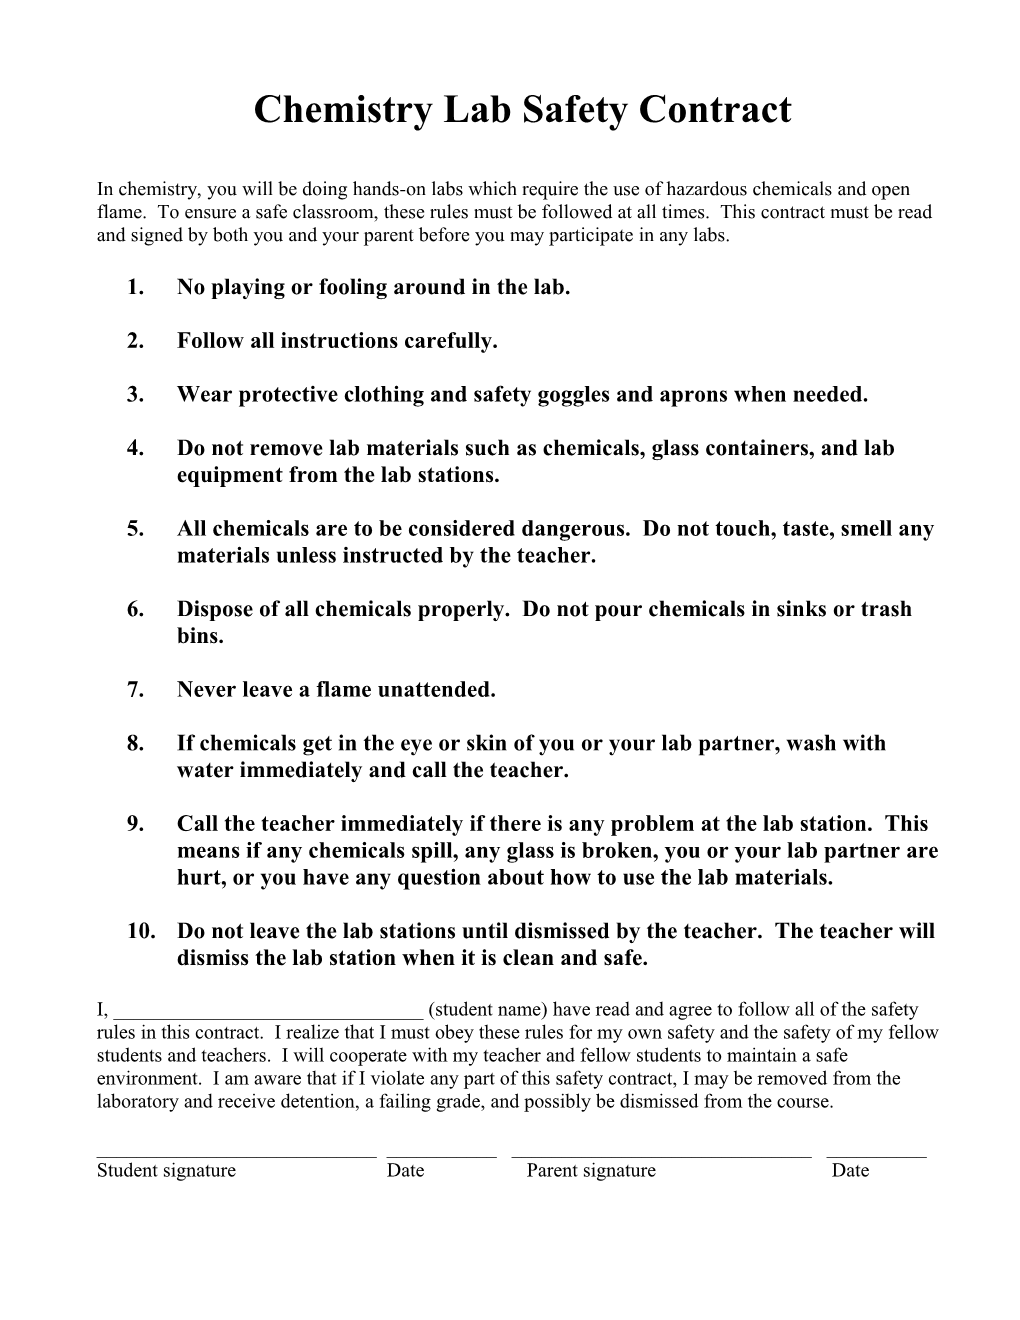 Chemistry Lab Safety Contract